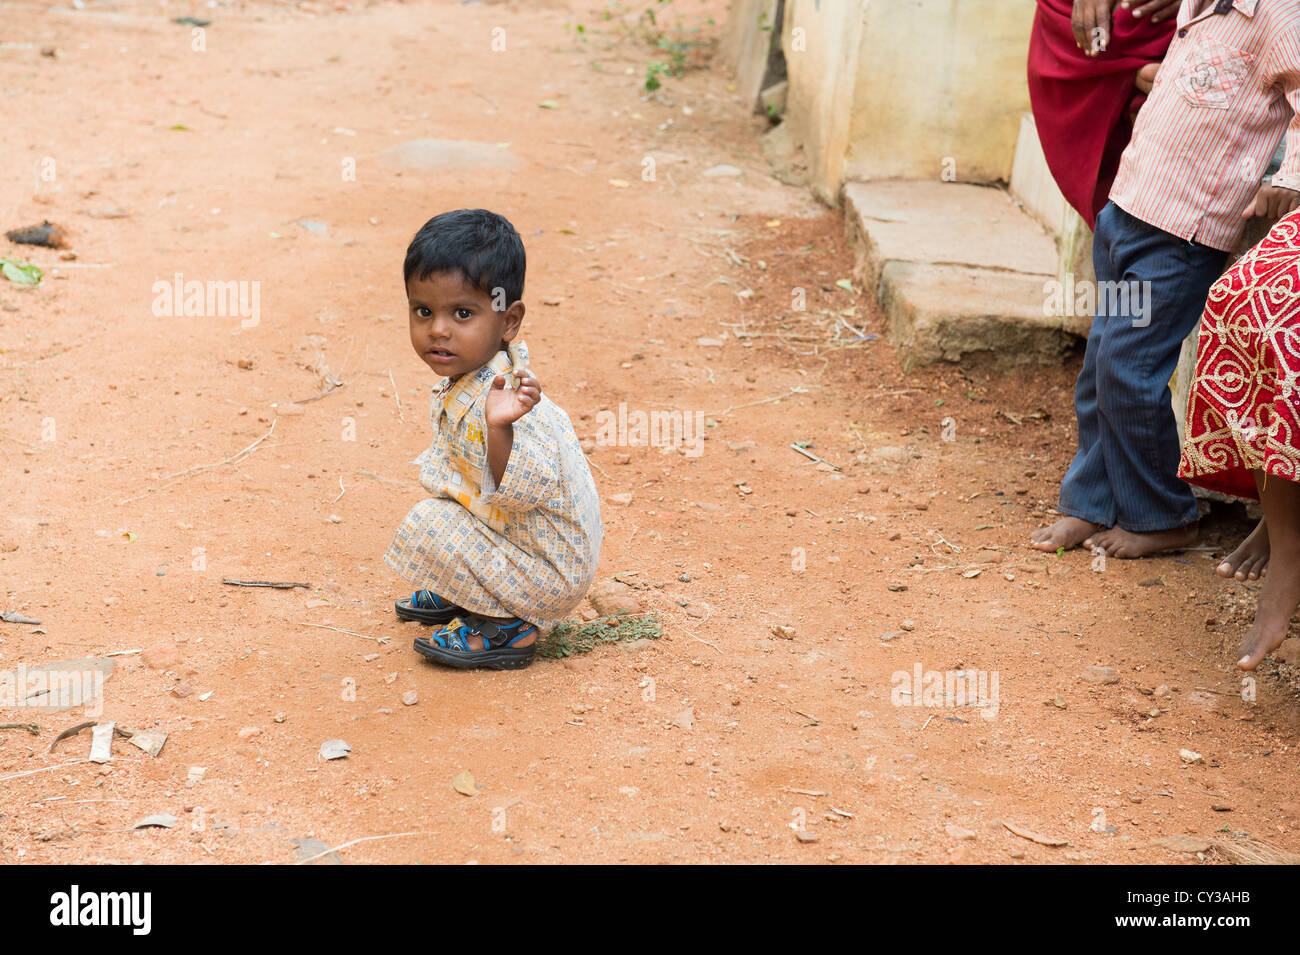 Small indian boy playing with a stick in a rural indian village. Andhra Pradesh, India Stock Photo